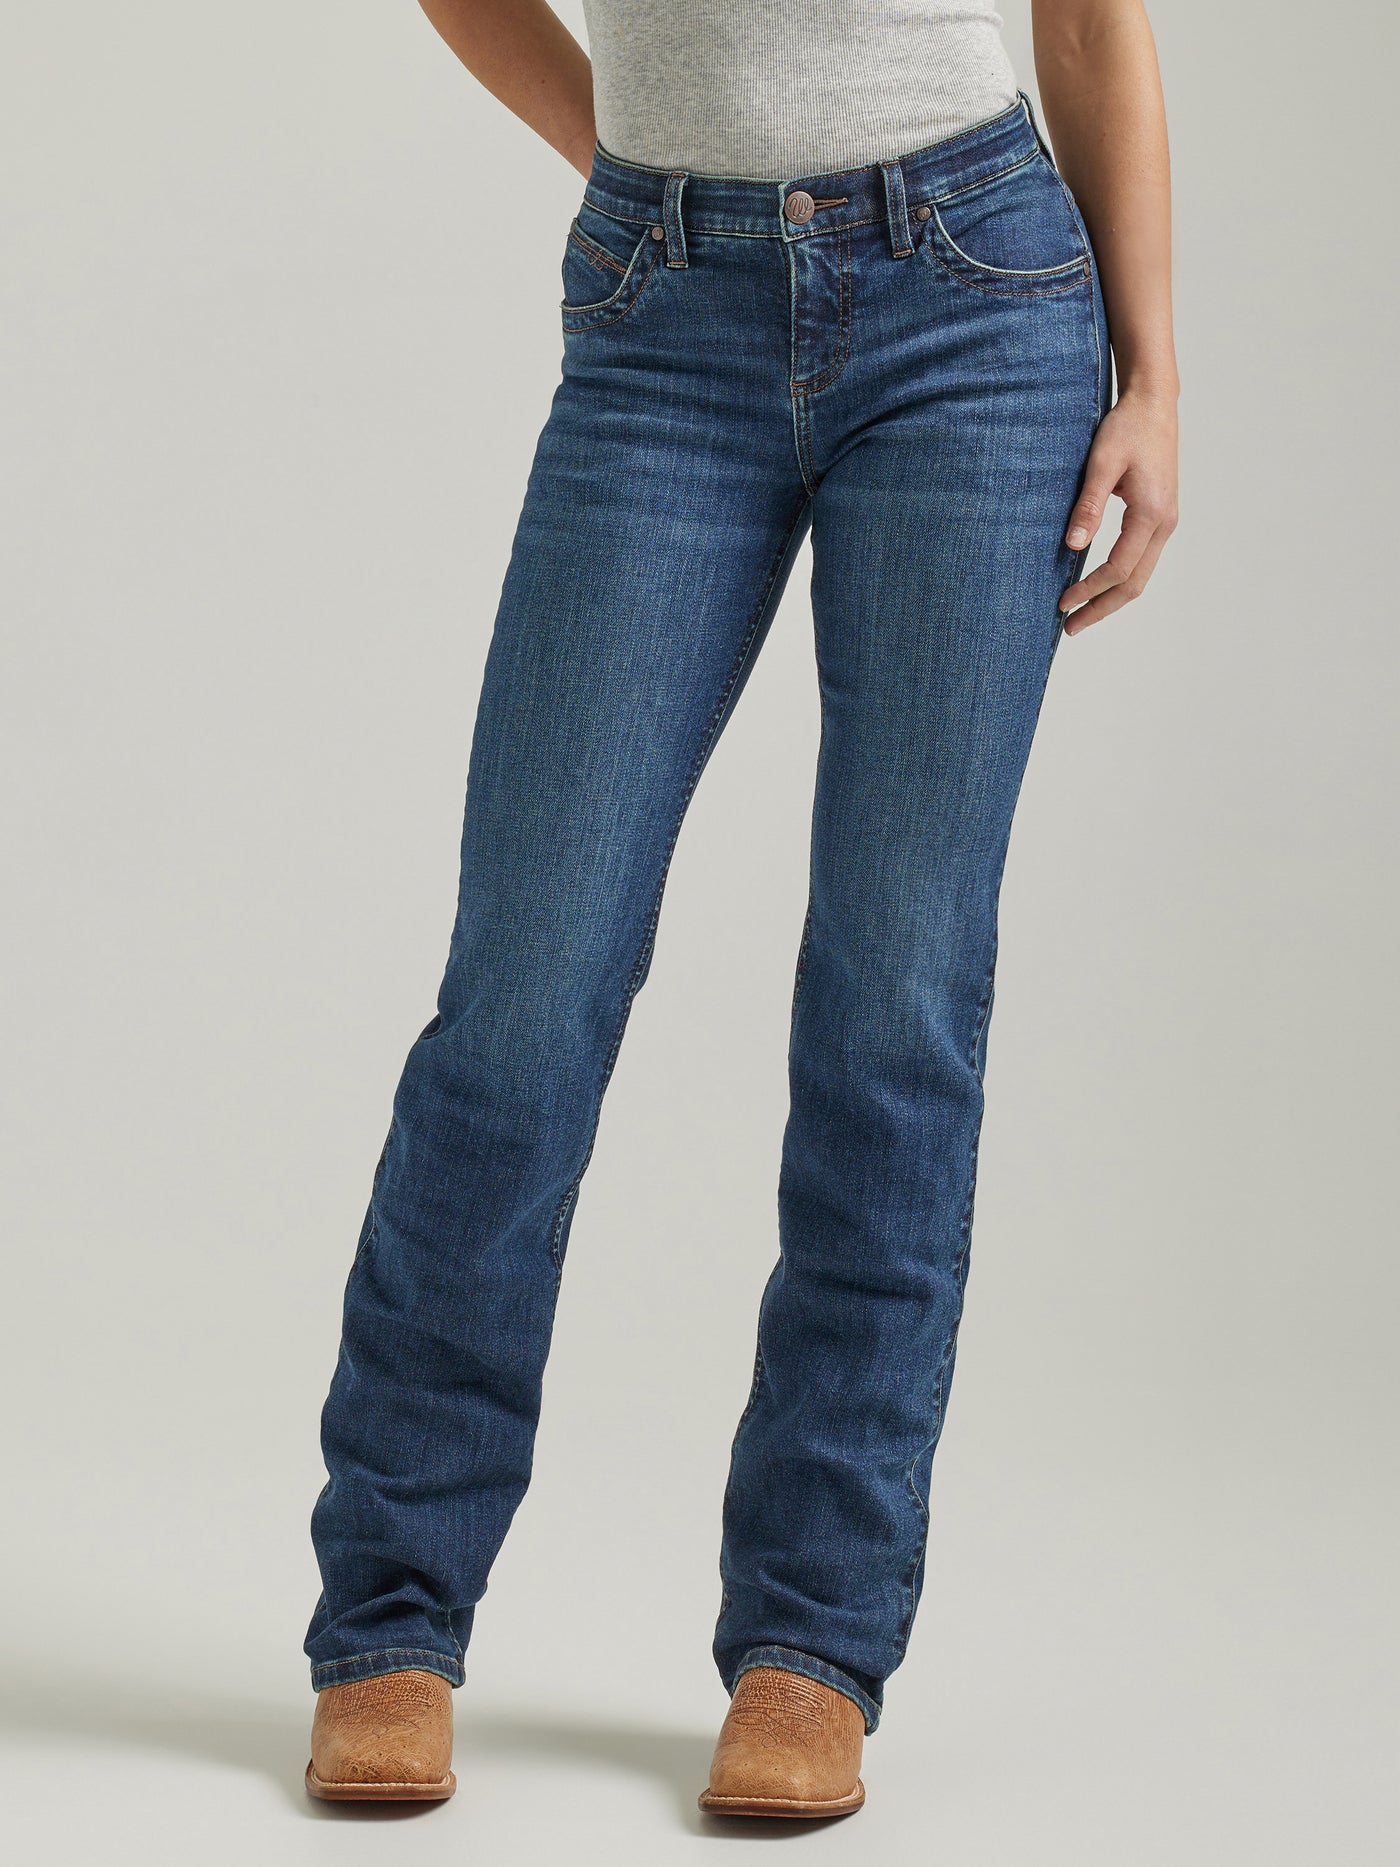 Wrangler Women's Amy Q-Baby Ultimate Riding Jean